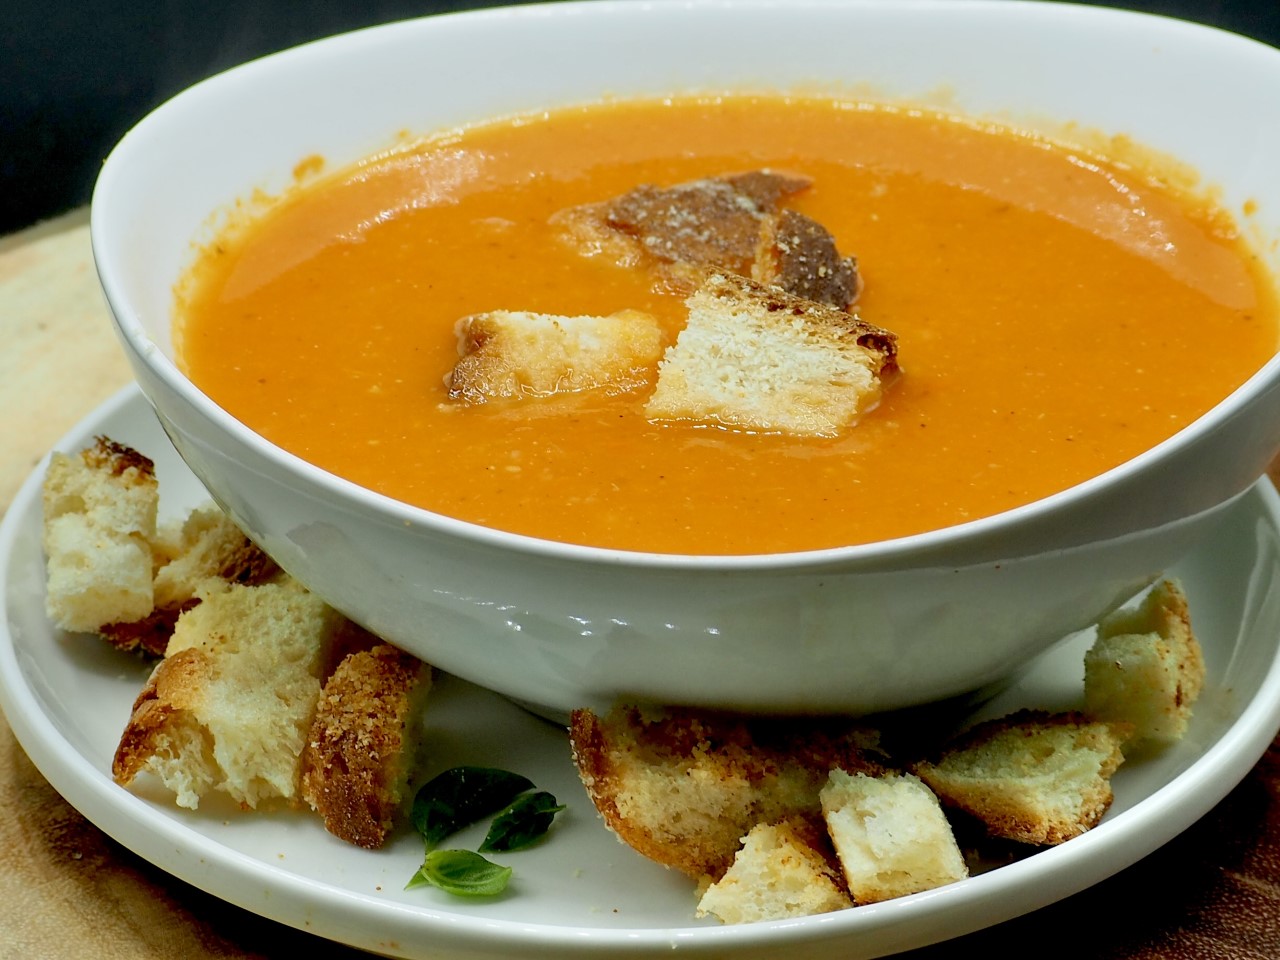 Tomato Basil Soup (with real tomatoes) and with Homemade Garlic Parmesan Croutons